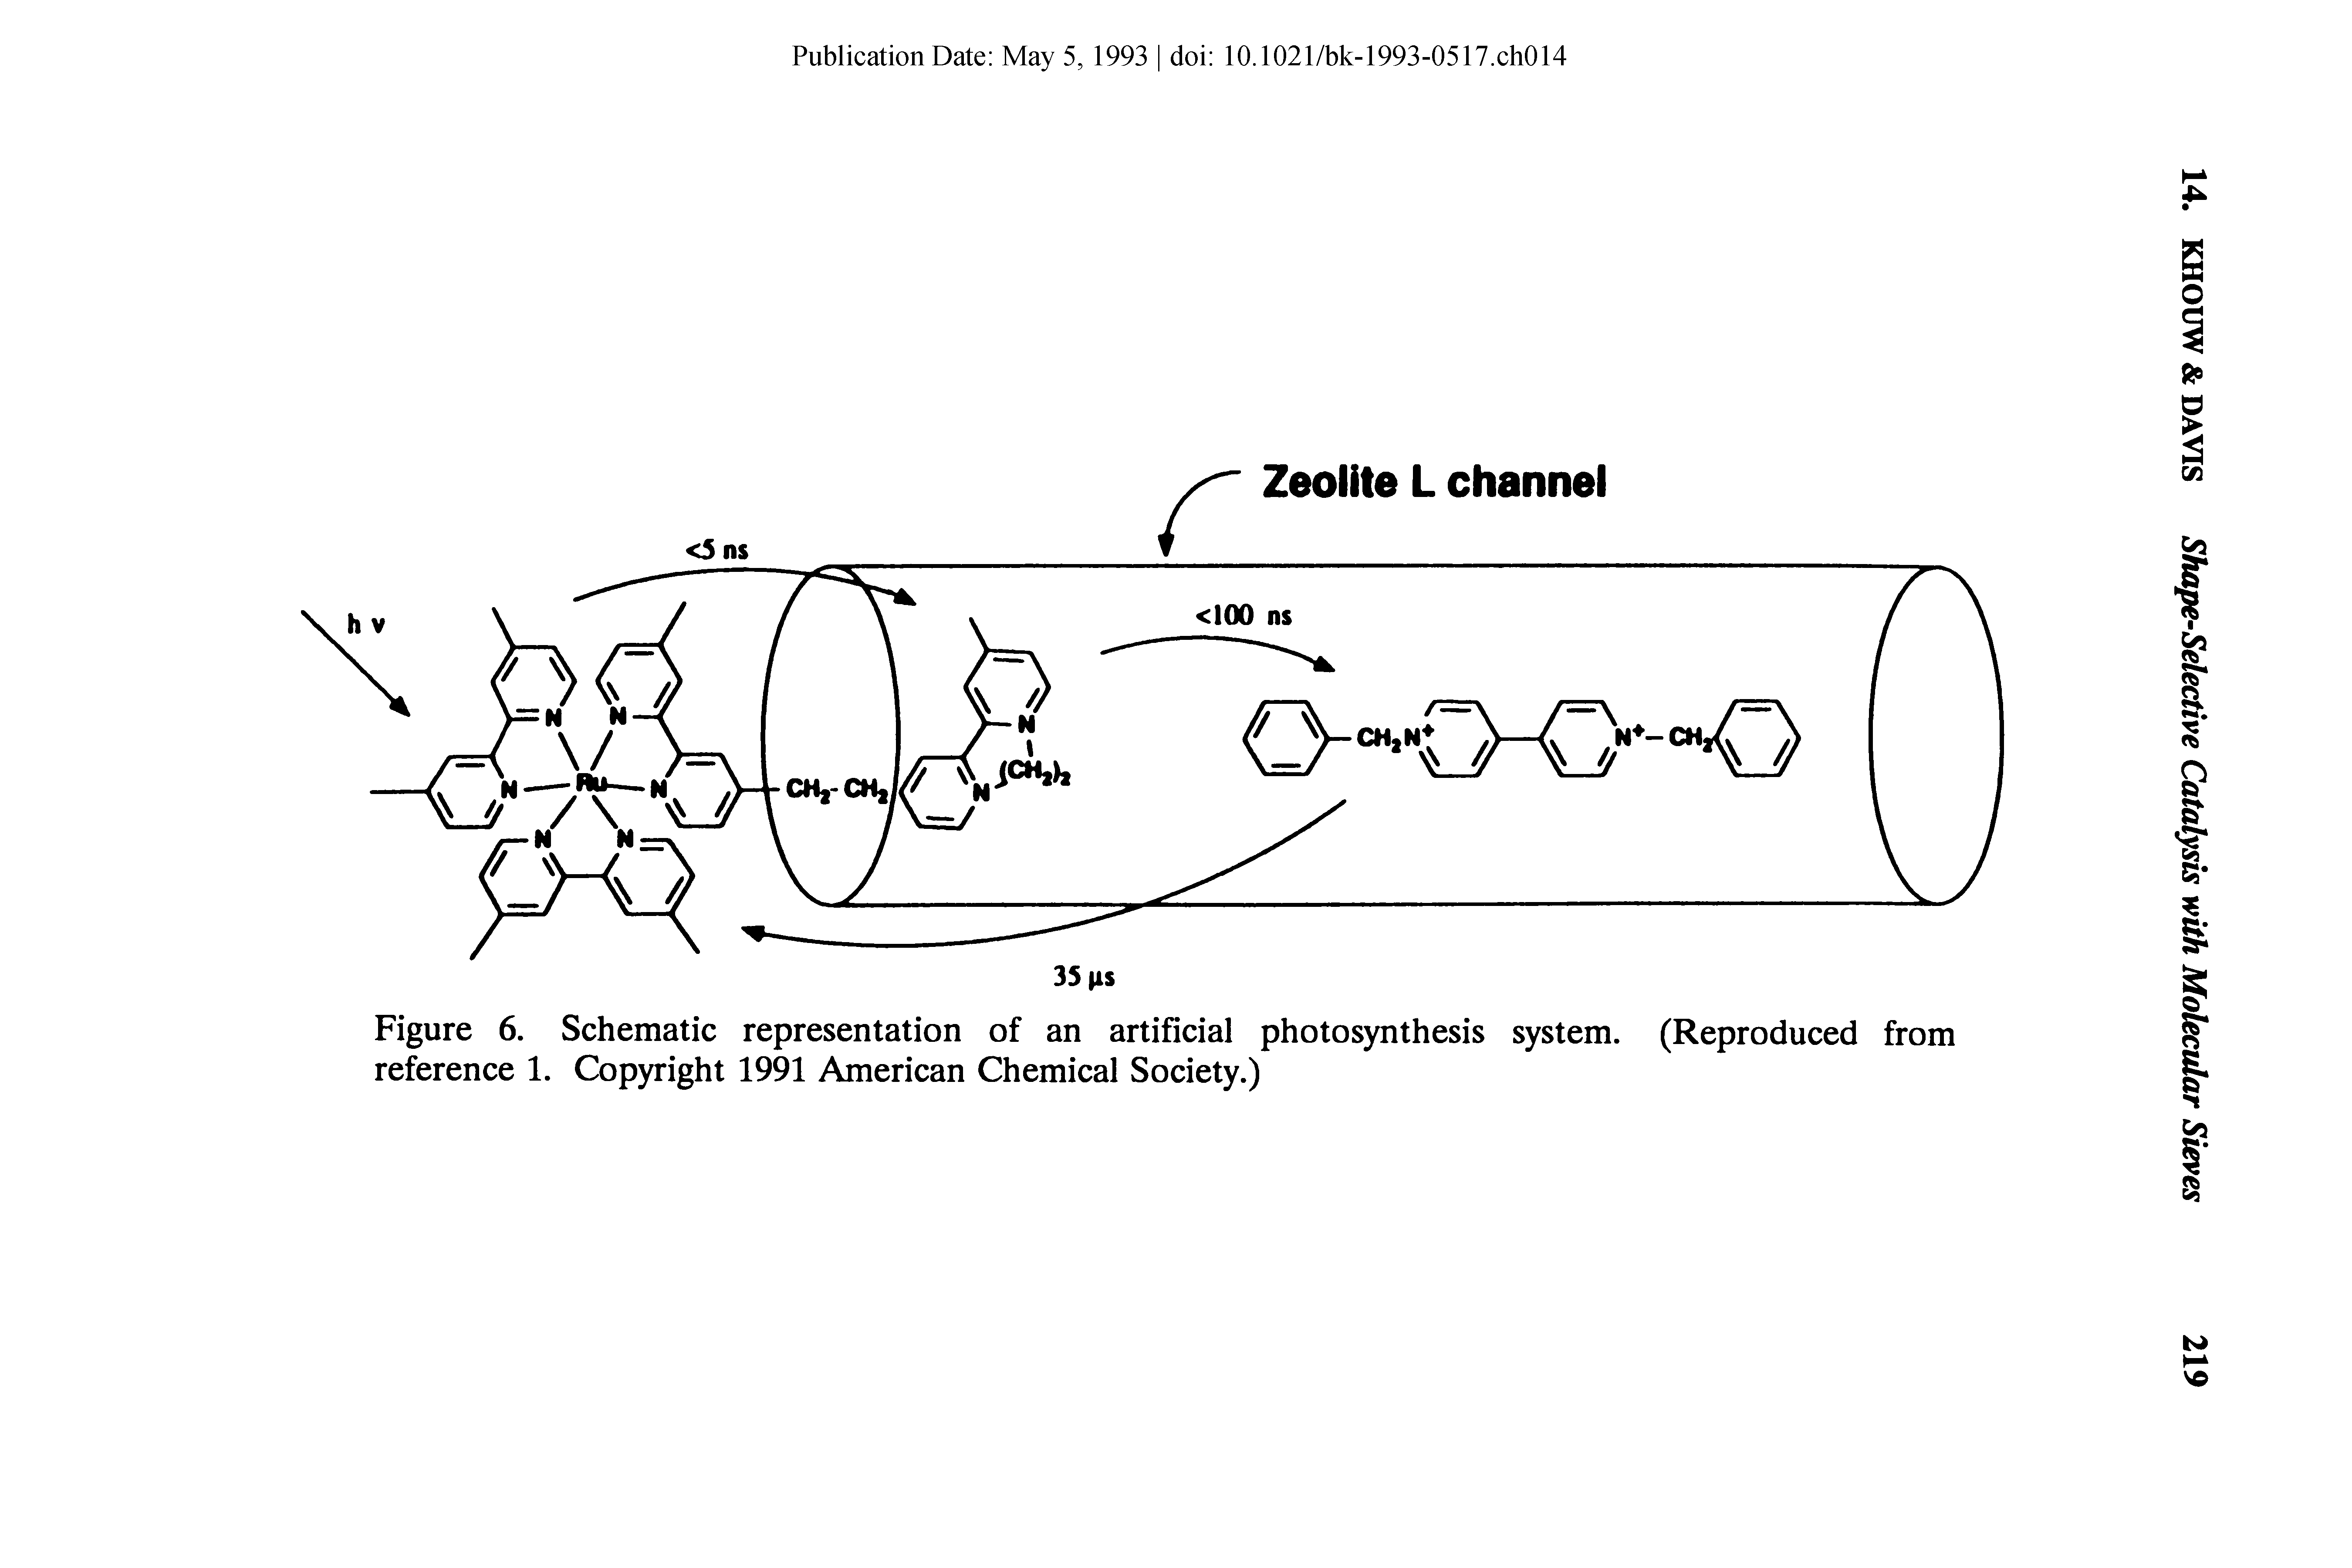 Figure 6. Schematic representation of an artificial photosynthesis system. (Reproduced from reference 1. Copyright 1991 American Chemical Society.)...